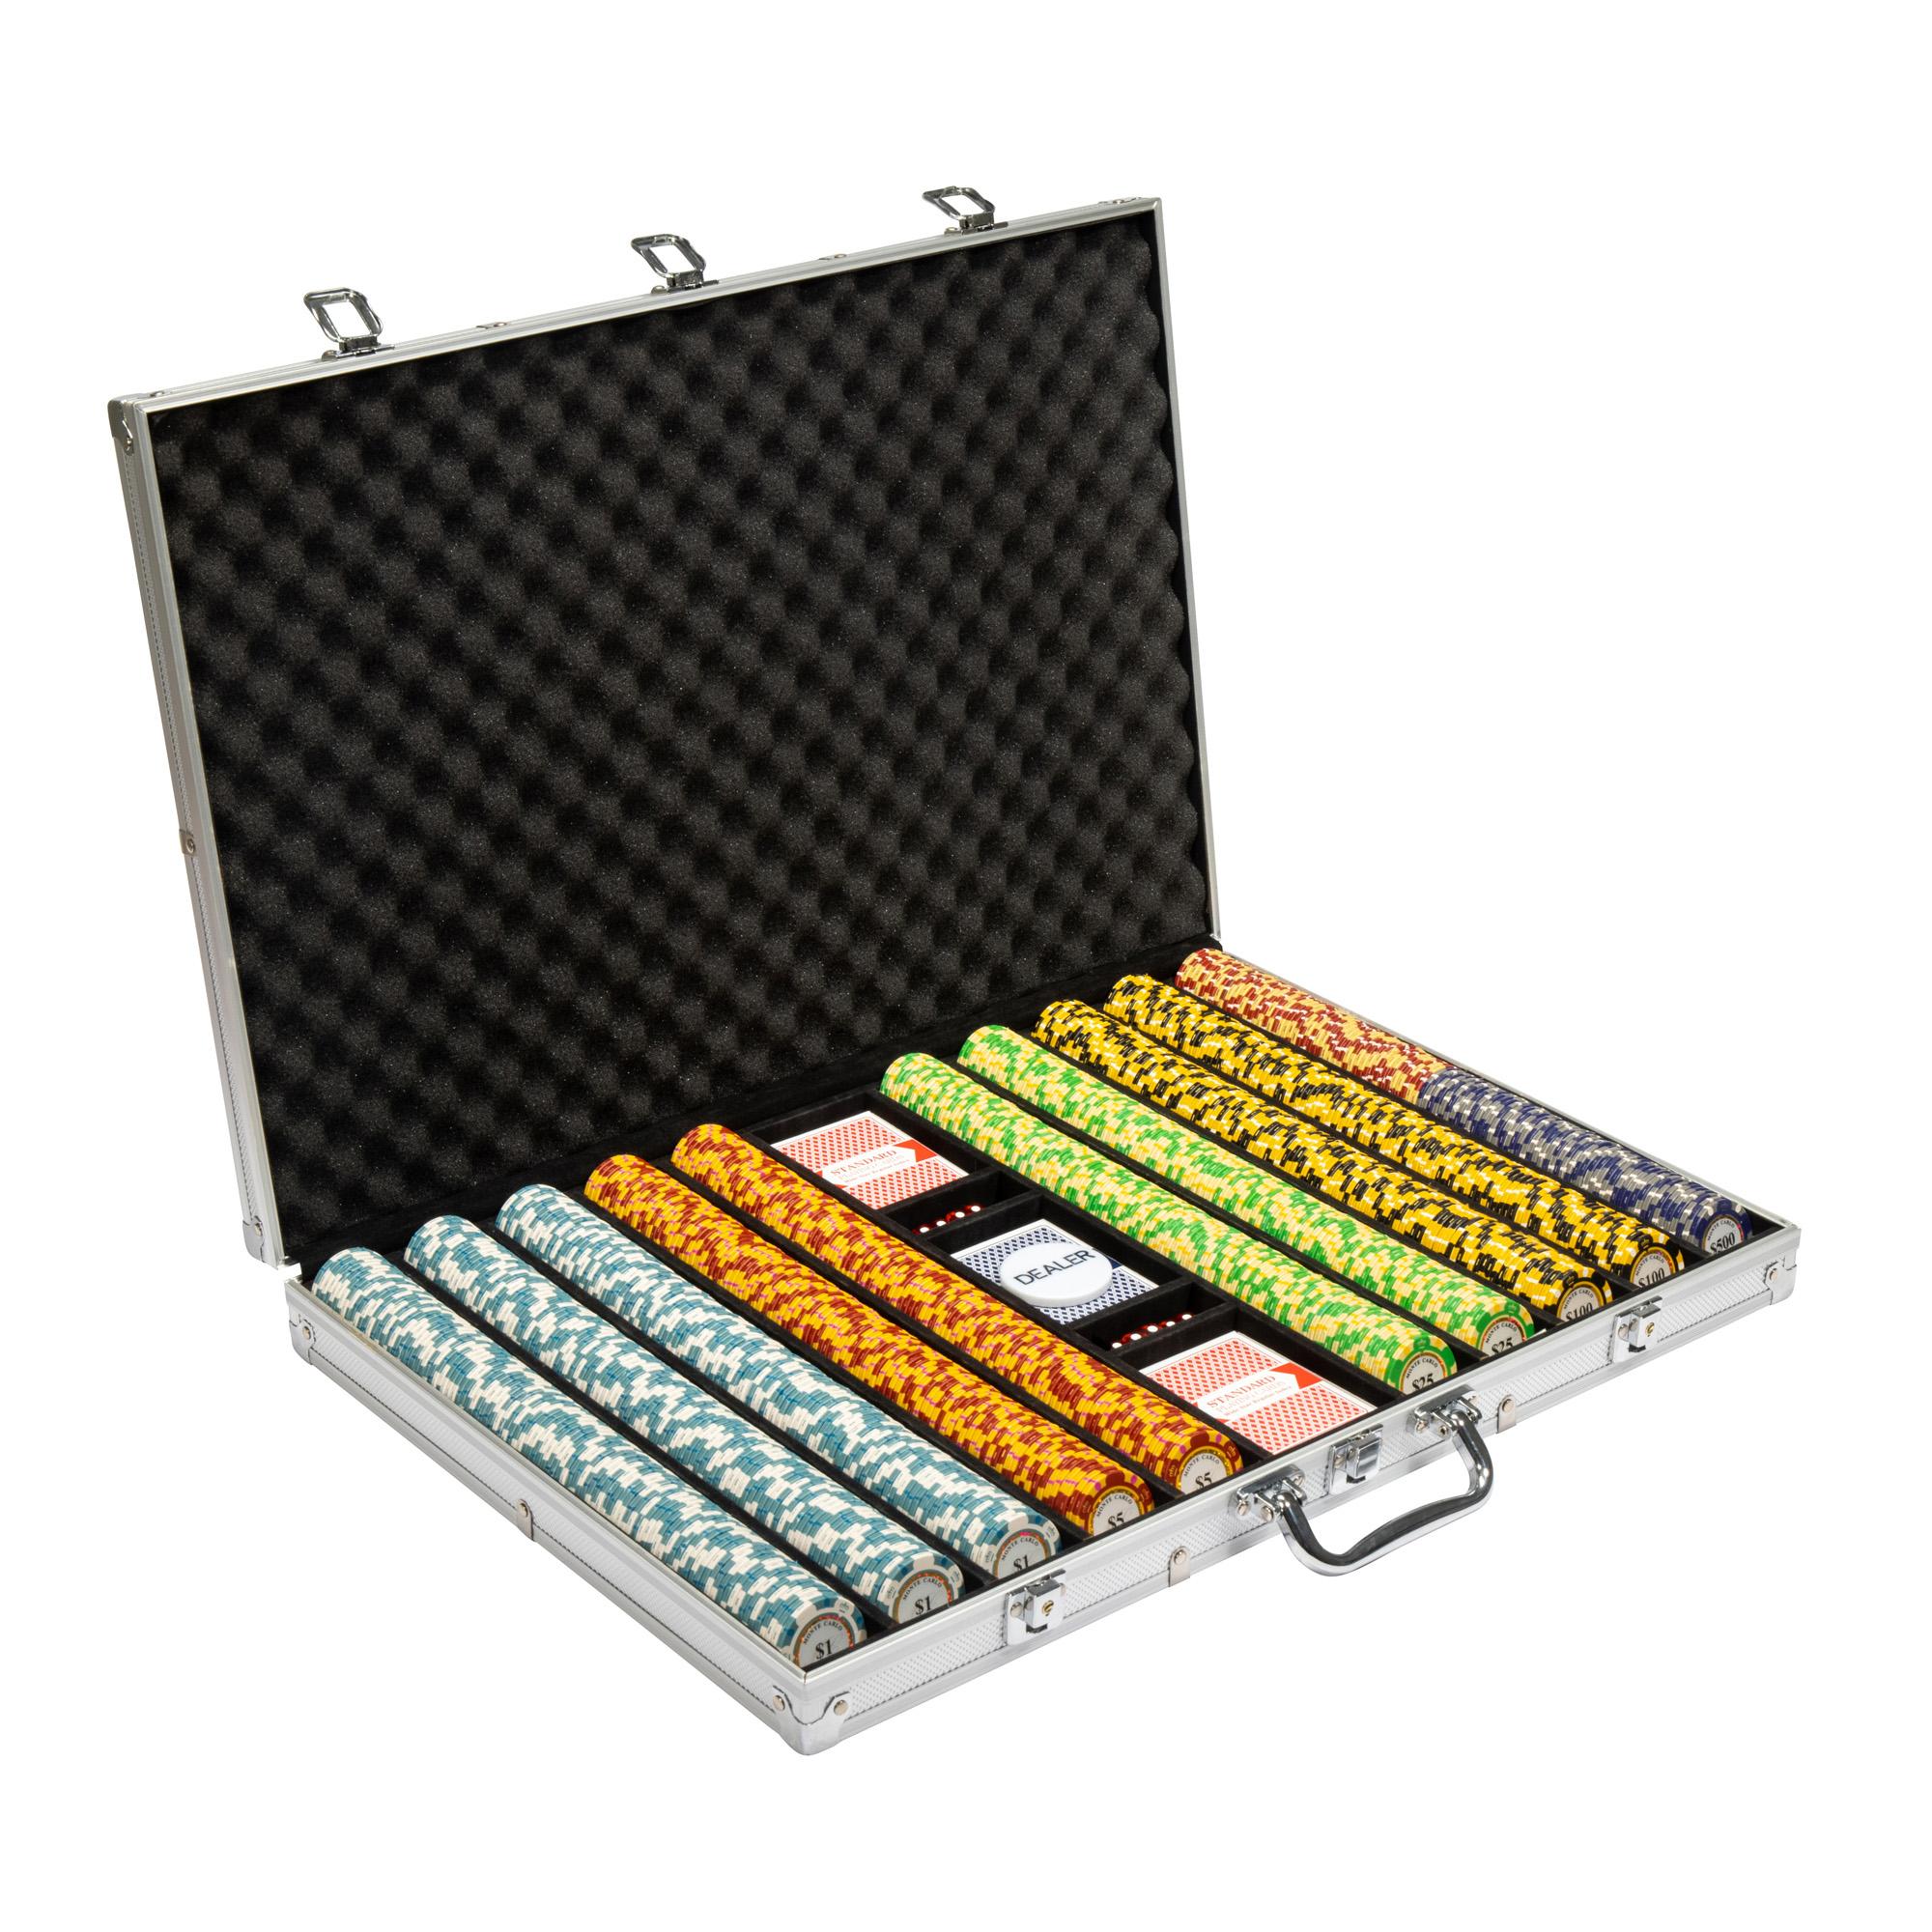 Monte Carlo 14-gram Poker Chip Set in Aluminum Case (1000 Count) - Clay Composite, Holo Inlay